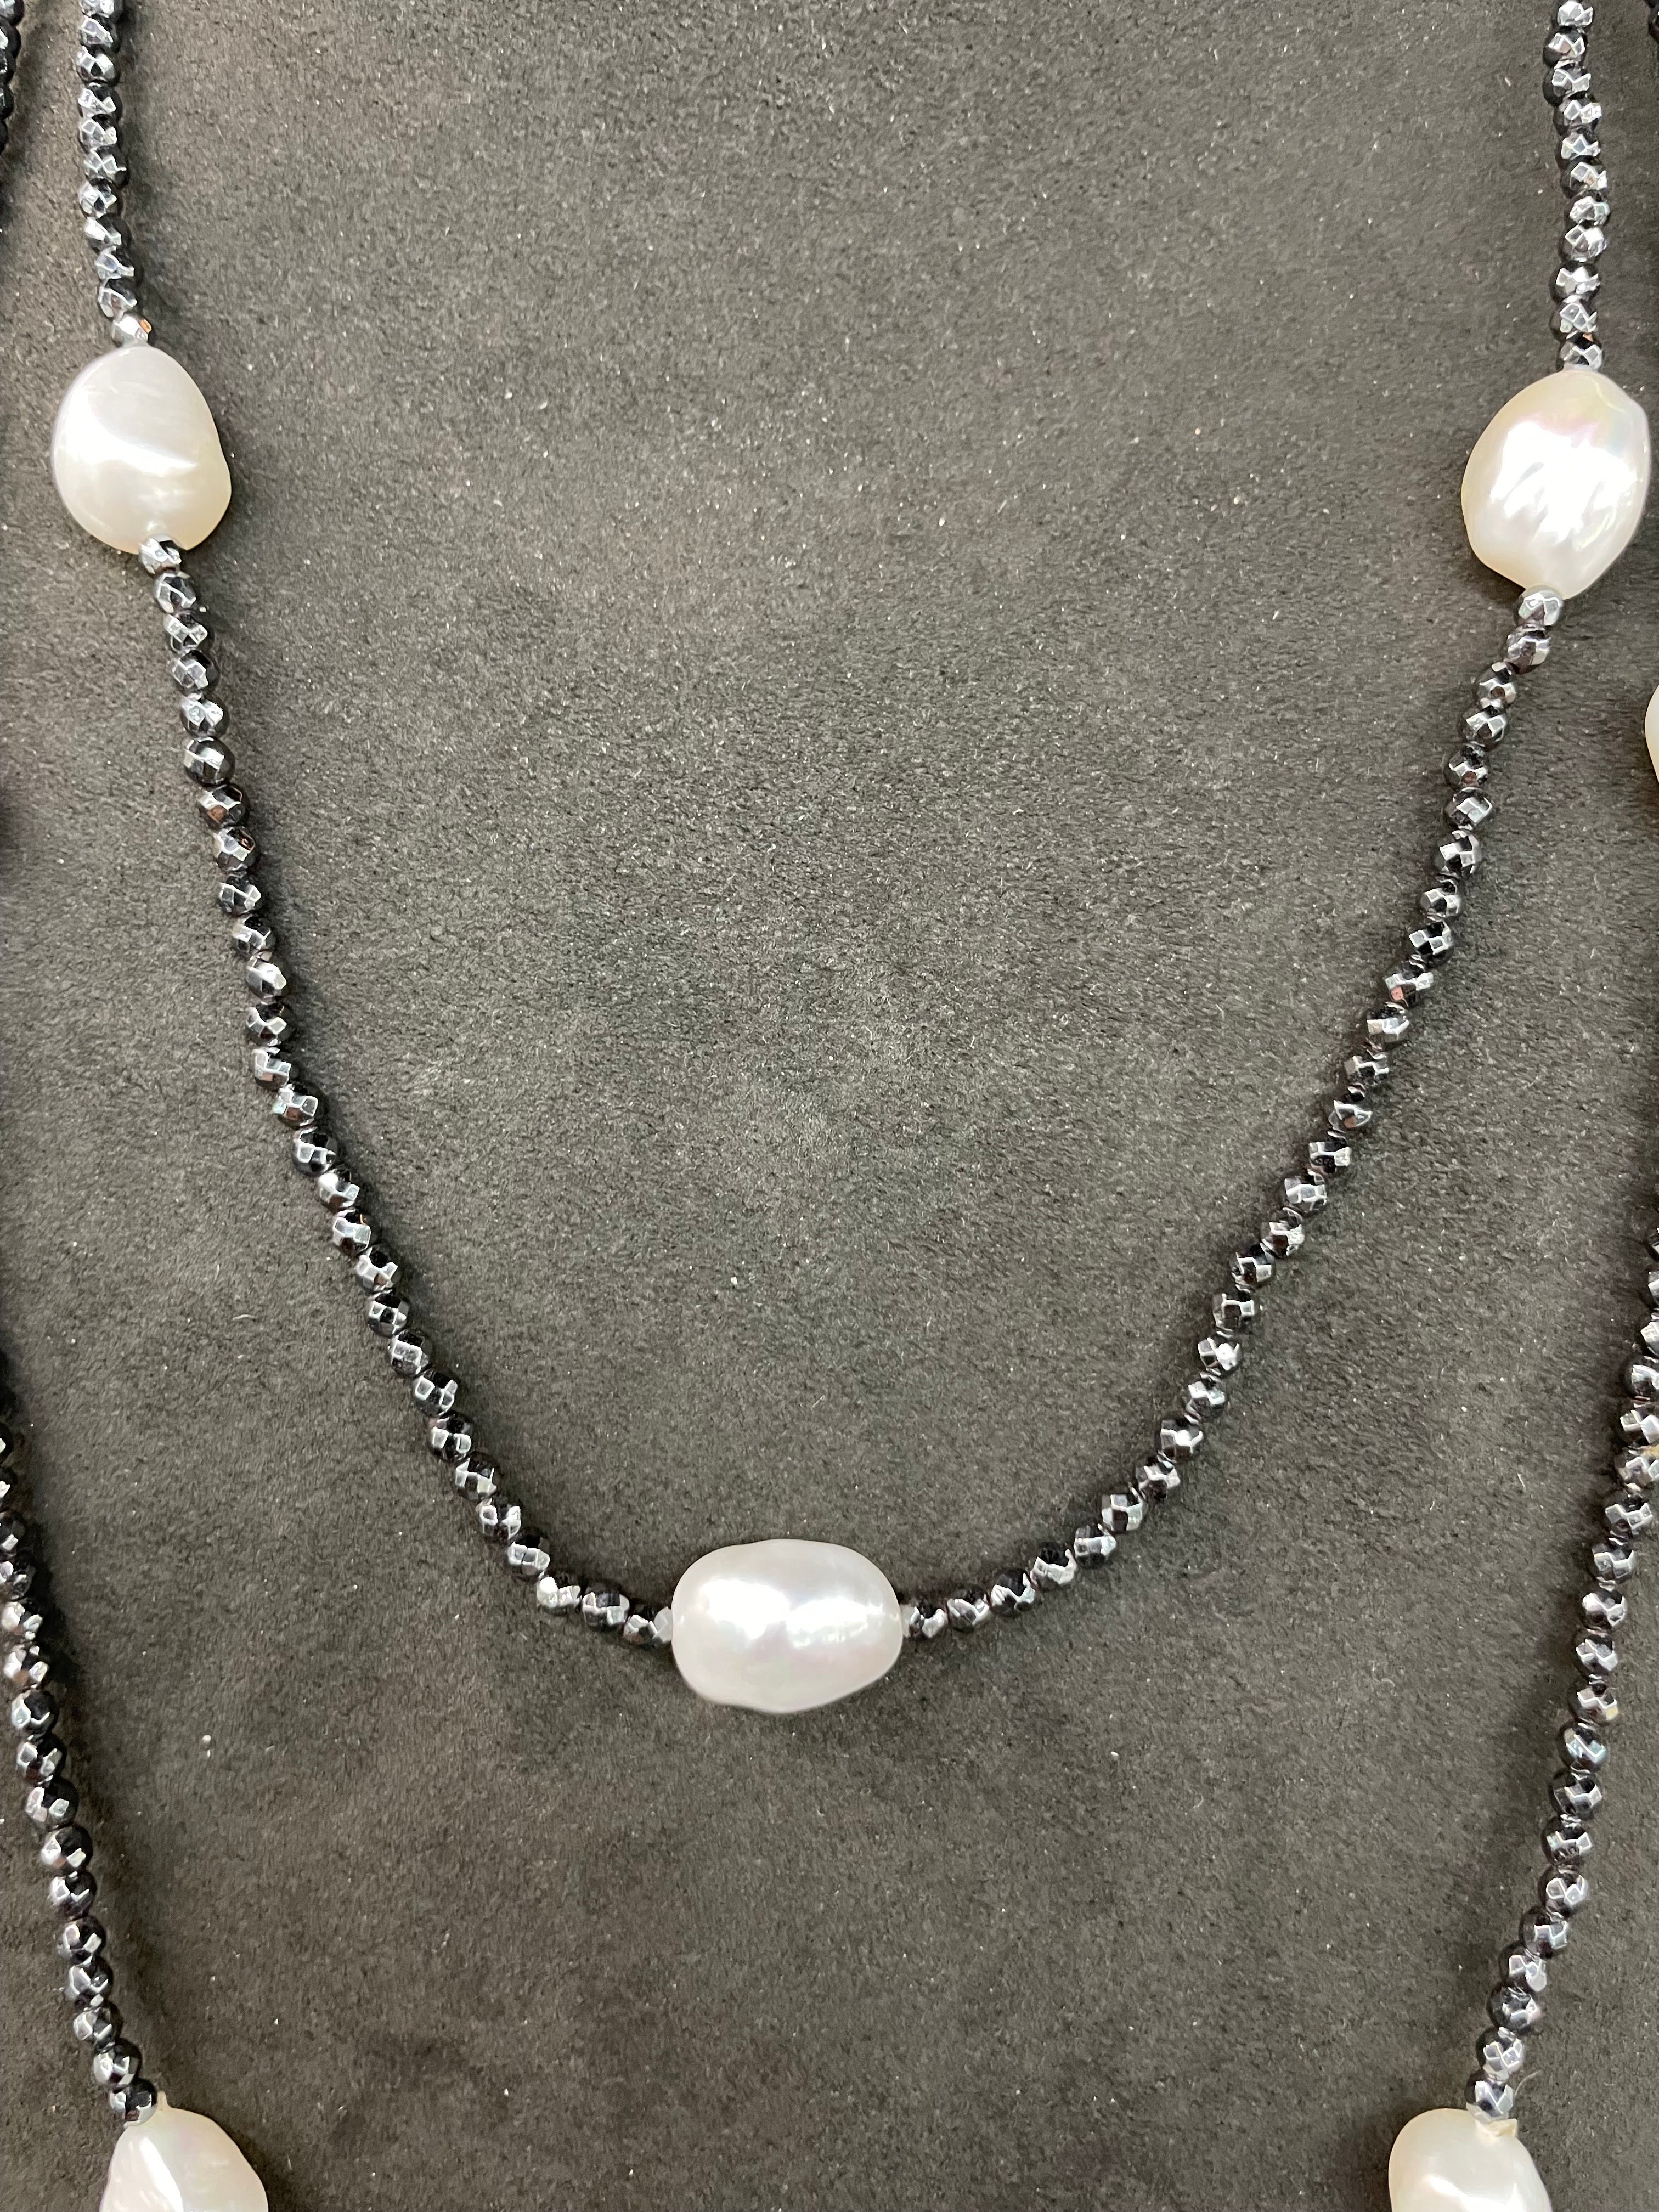 A strand of beads featuring medium to dark color Hematite and white pearls measuring 50 inches. 
Each Pearl has 3.5 inches of Hematite beads in between every Pearl. 
Pearl measures average 10 x 14 mm 
Fun Fashion piece!